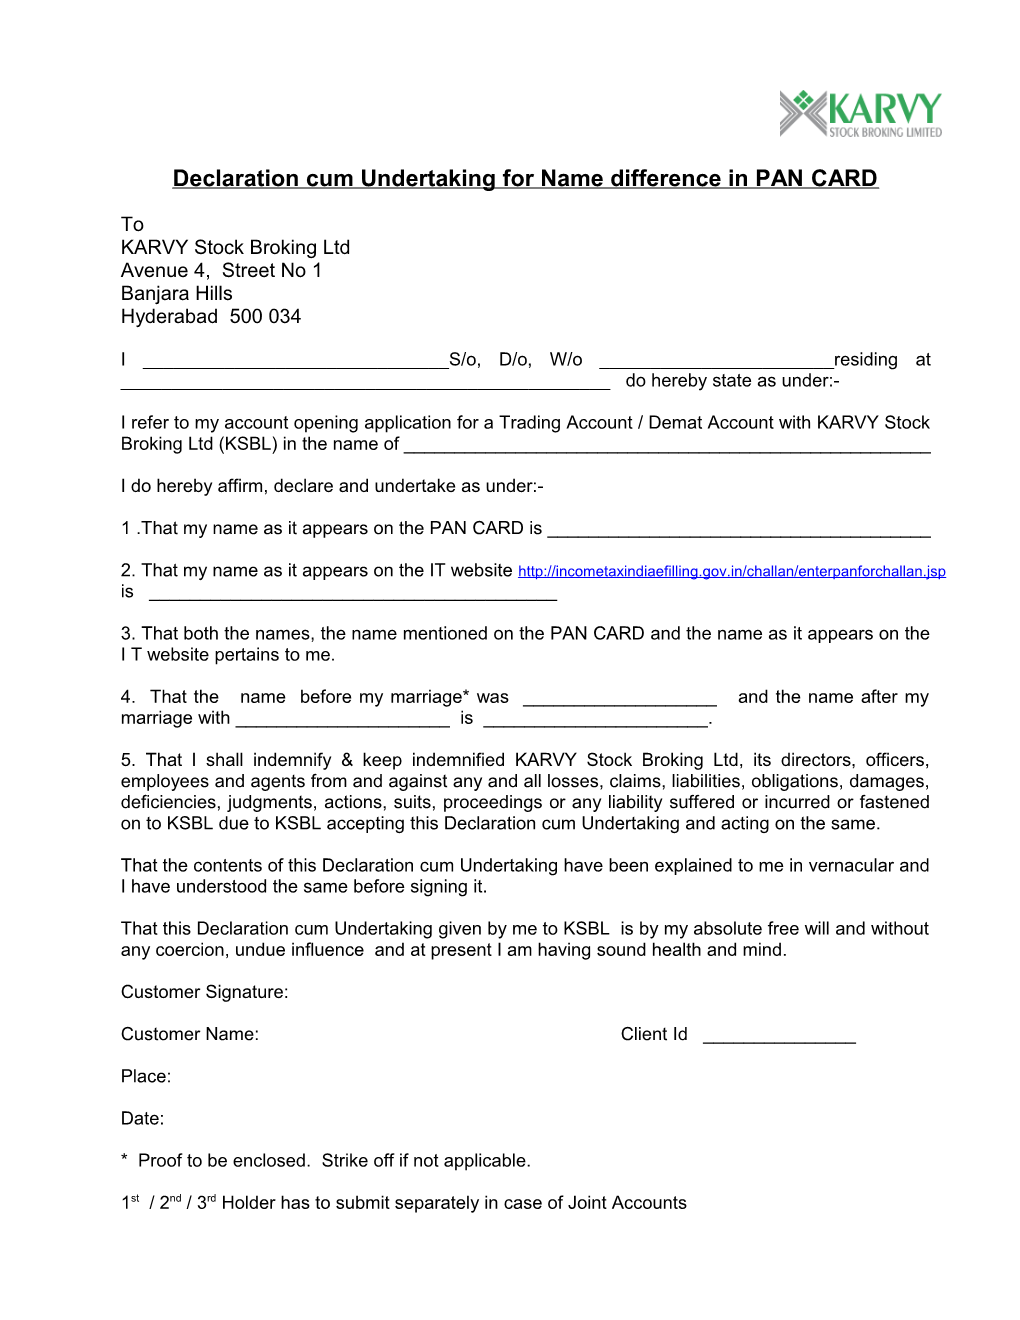 Declaration Cum Undertaking for Name Difference in PAN CARD